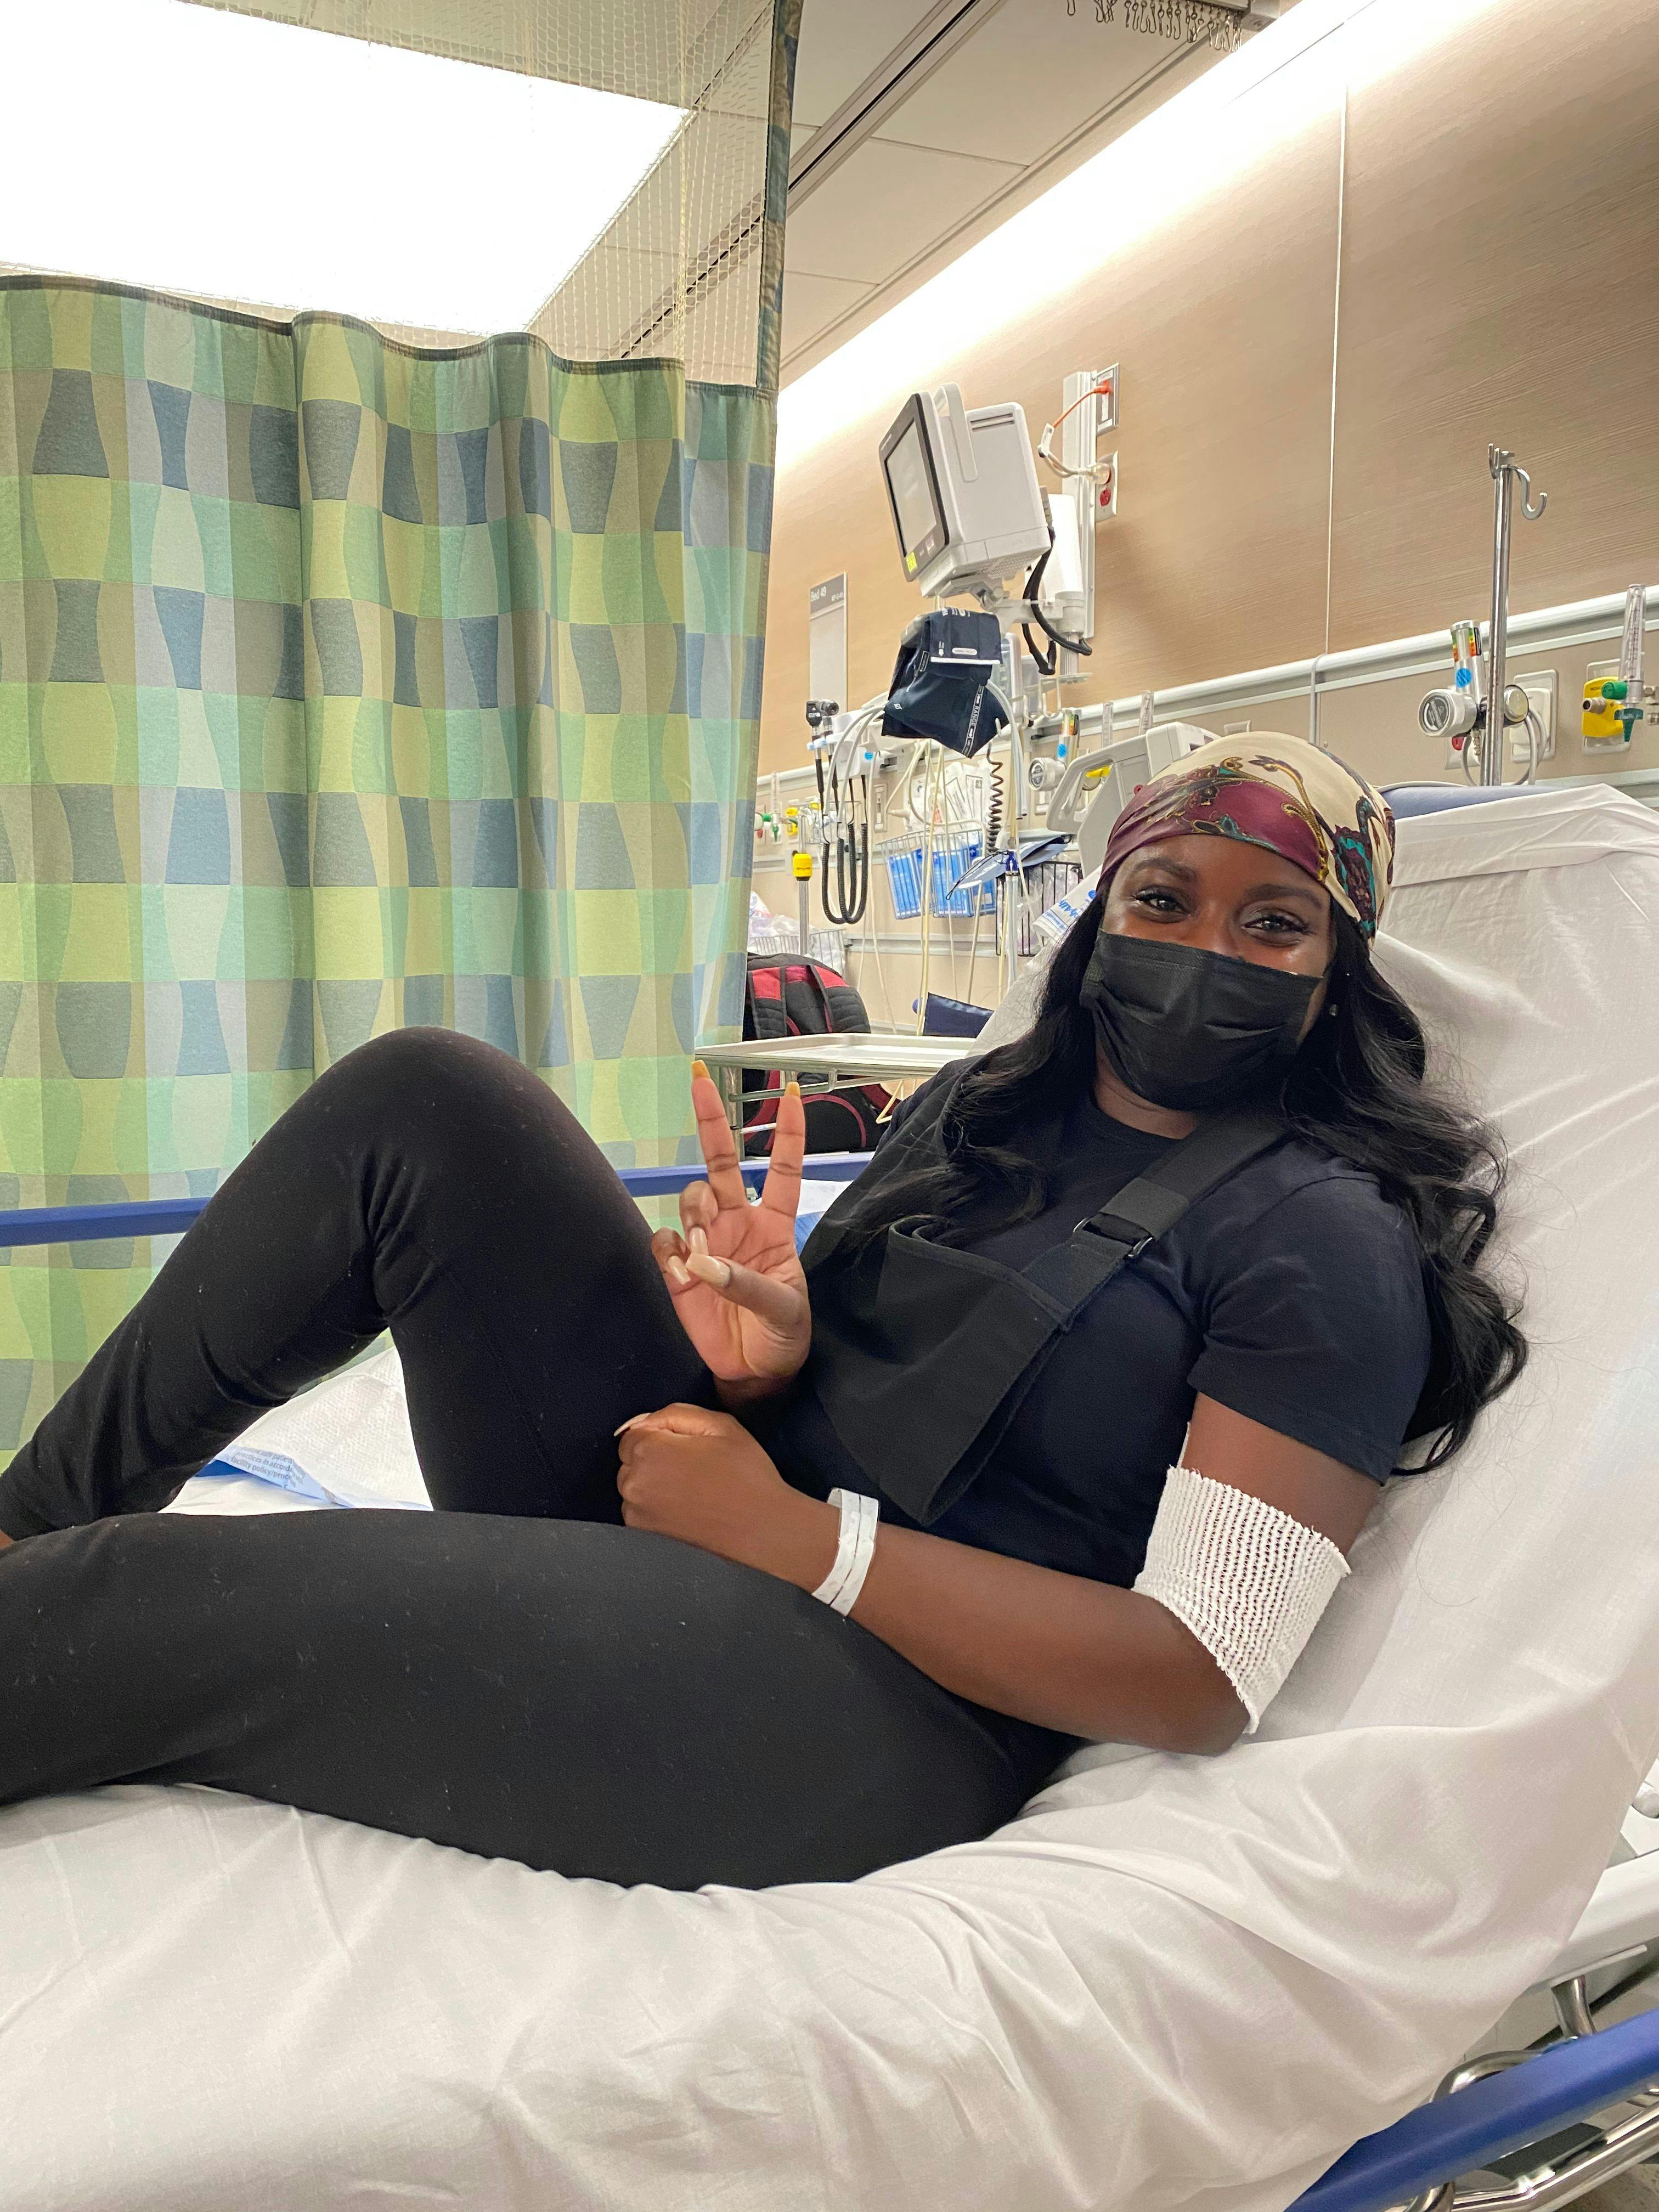 Paula Ngon, a black woman wearing a headscarf and mask, sits on a hospital bed, giving the "peace" sing | Photo provided by Paula Ngon